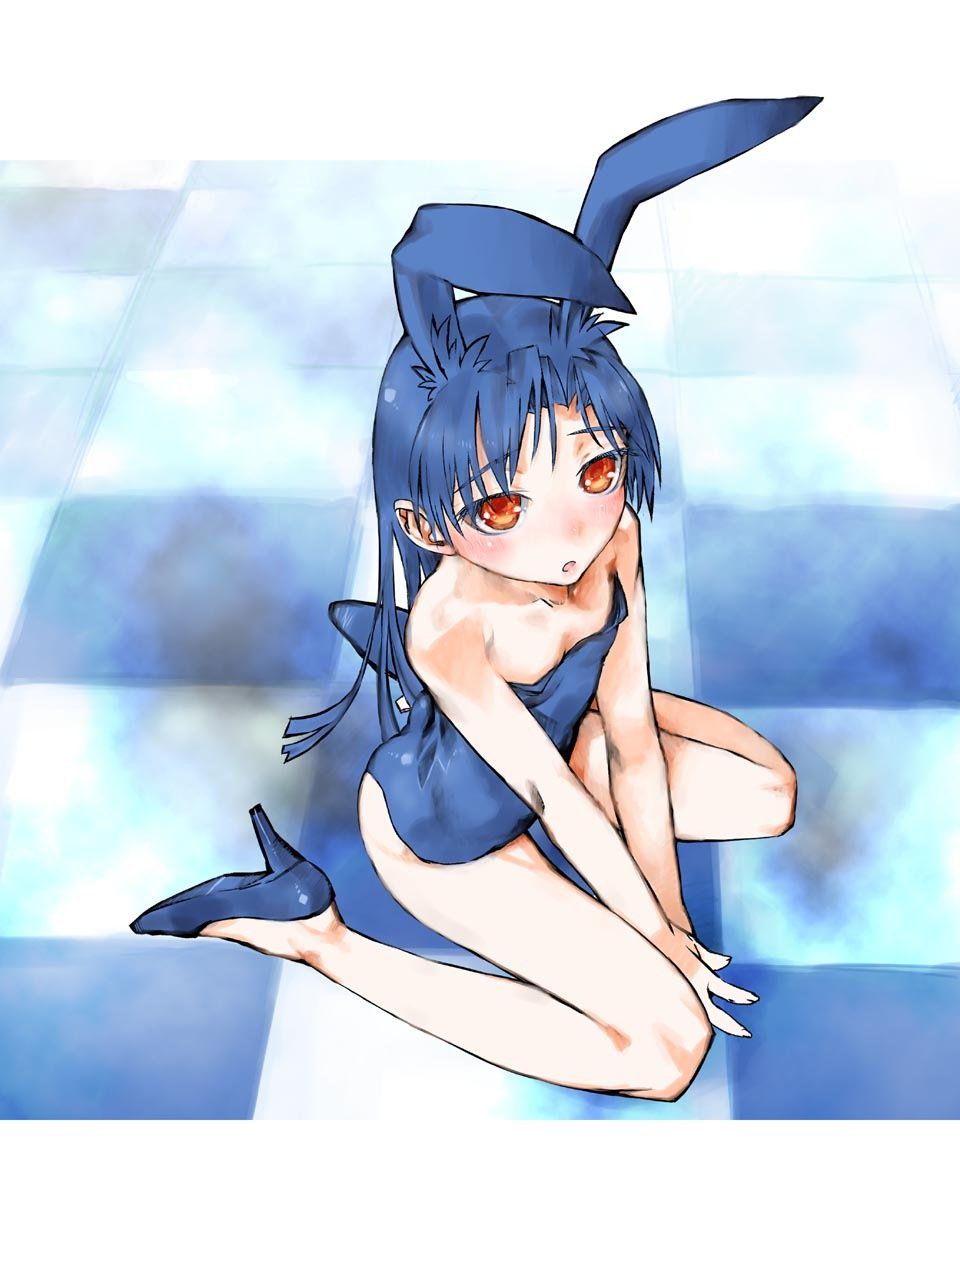 Two-dimensional erotic pictures of the Bunny girl. 6